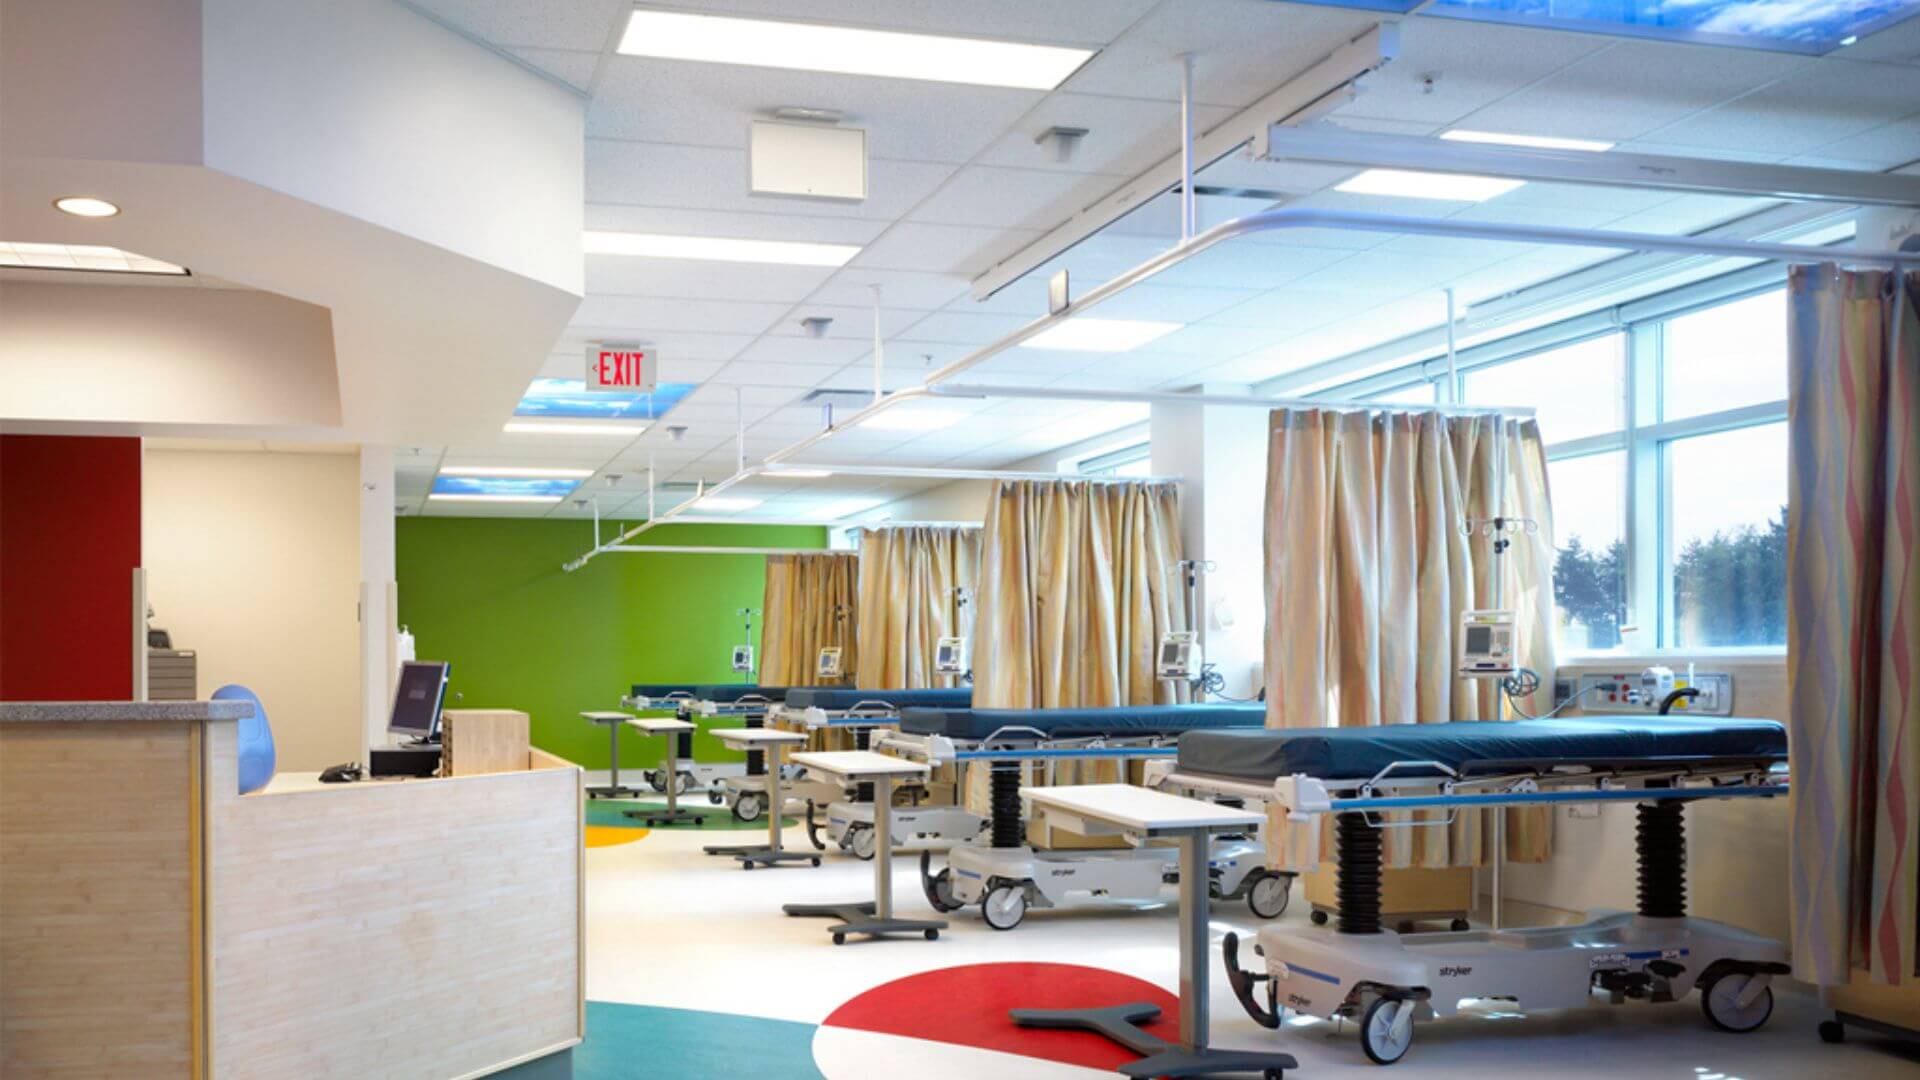 Factors to consider when upgrading hospital lighting systems